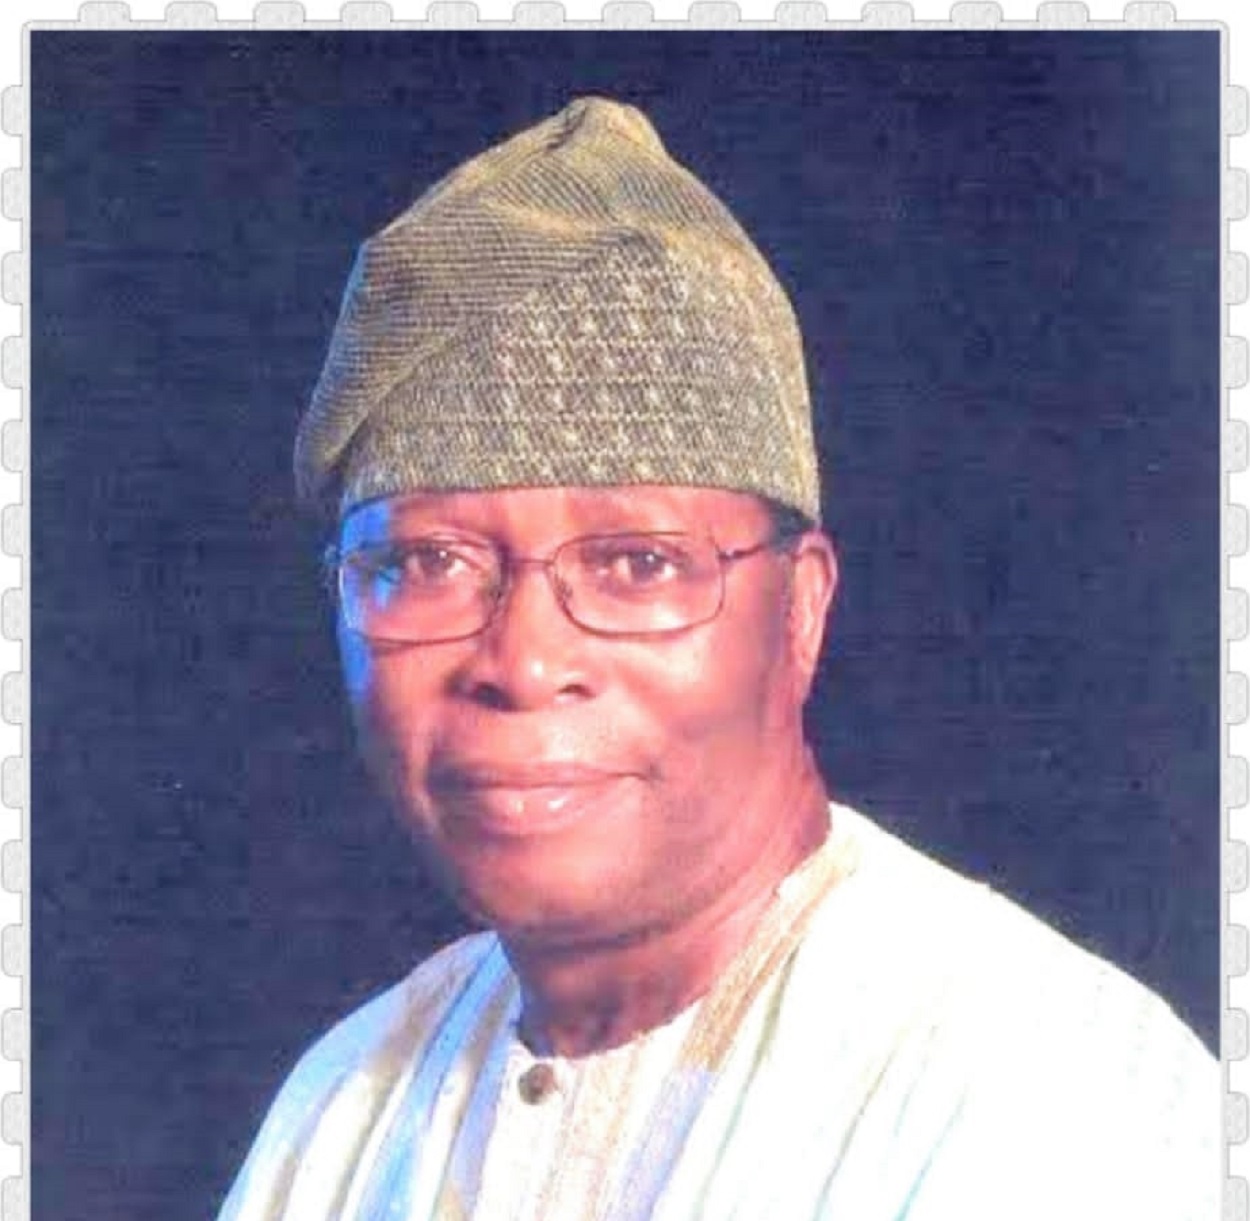 Former military governor of Oyo state, General Olurin, is dead